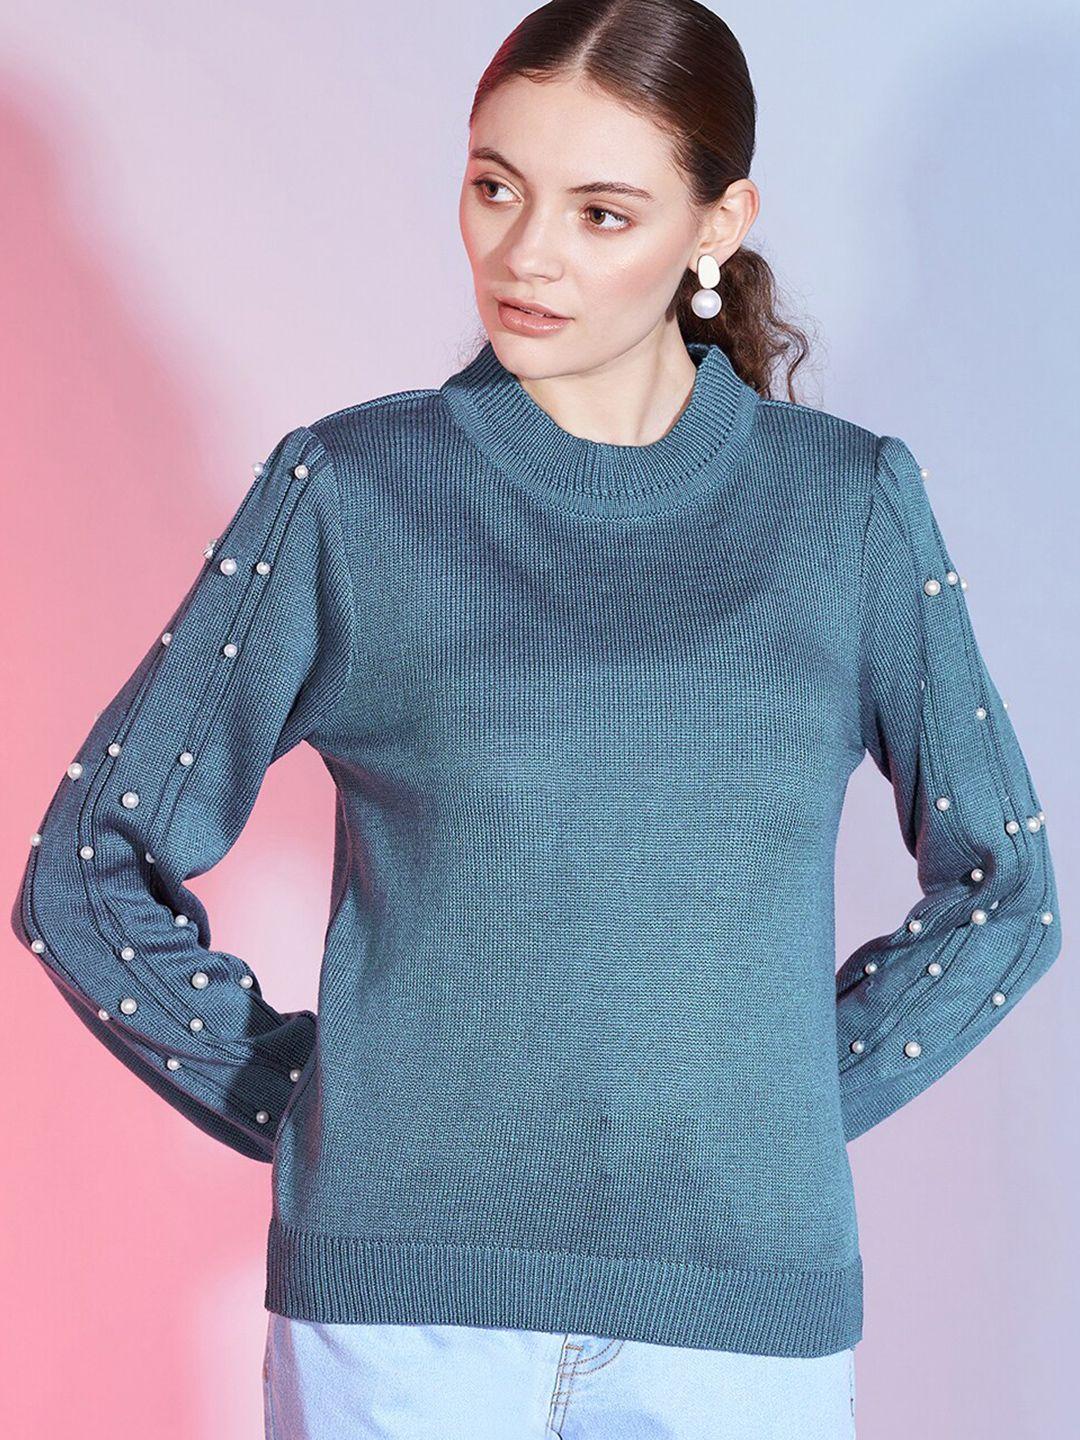 dressberry teal pullover with embellished detail